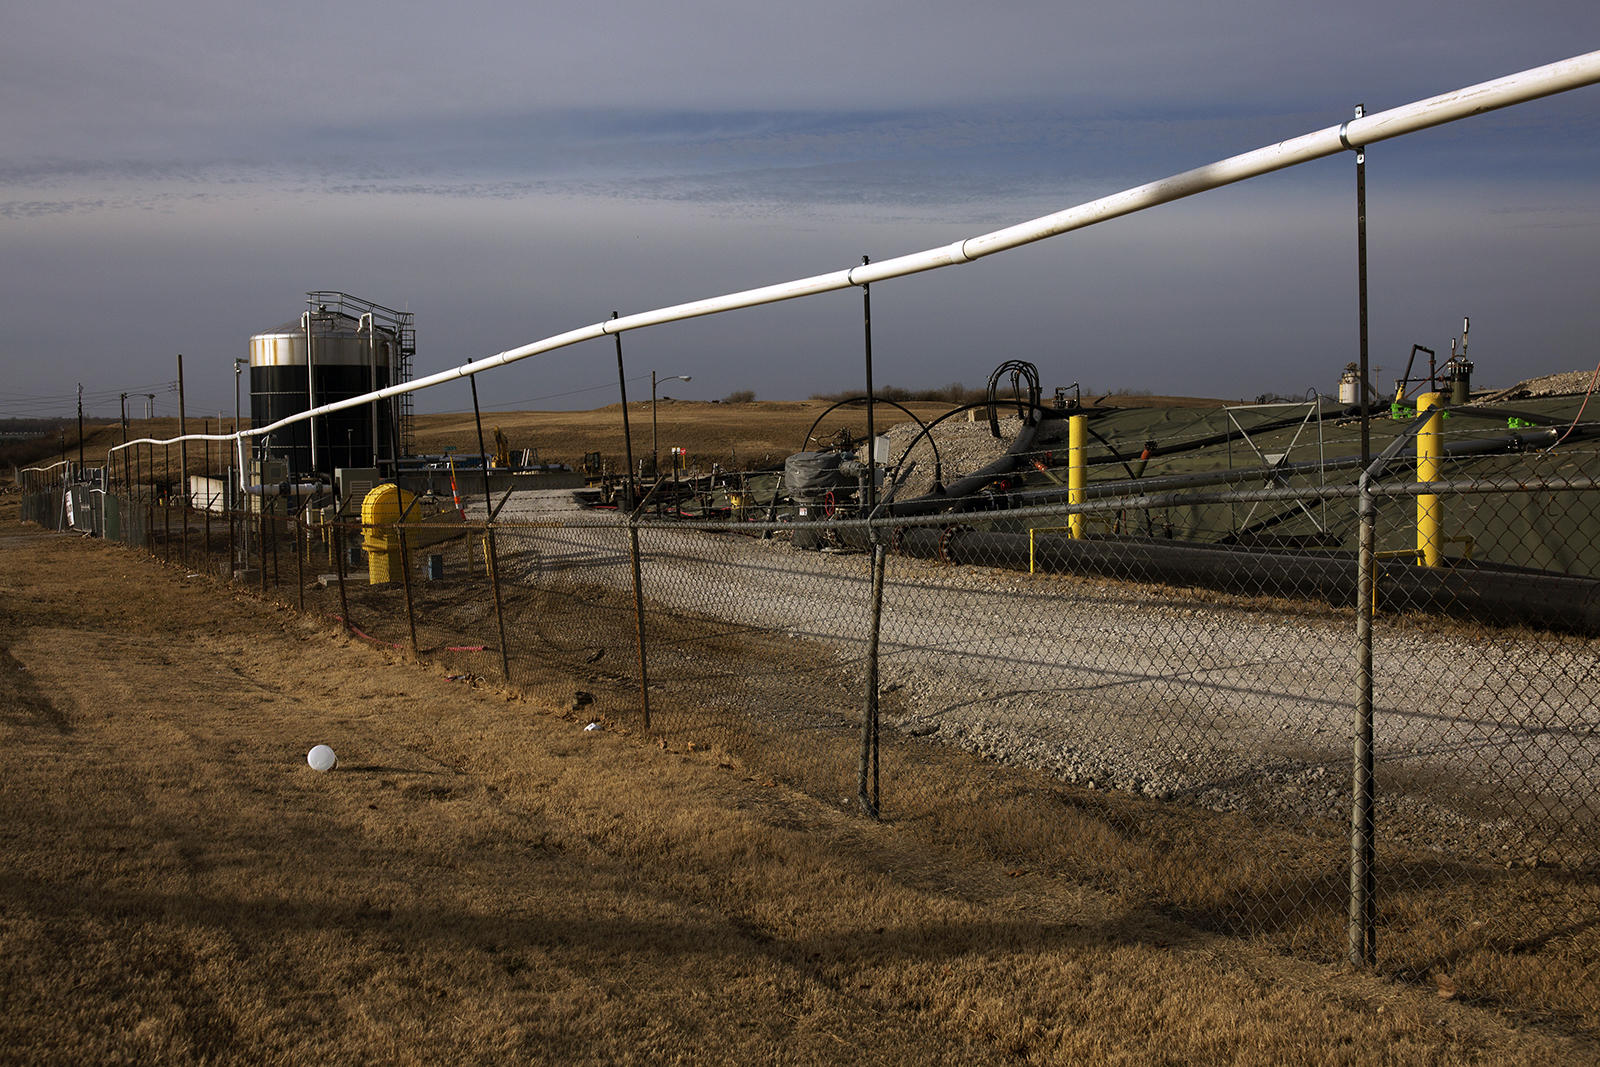 Residents Near West Lake Landfill Demand Protection During Radioactive Waste Removal | KBIA